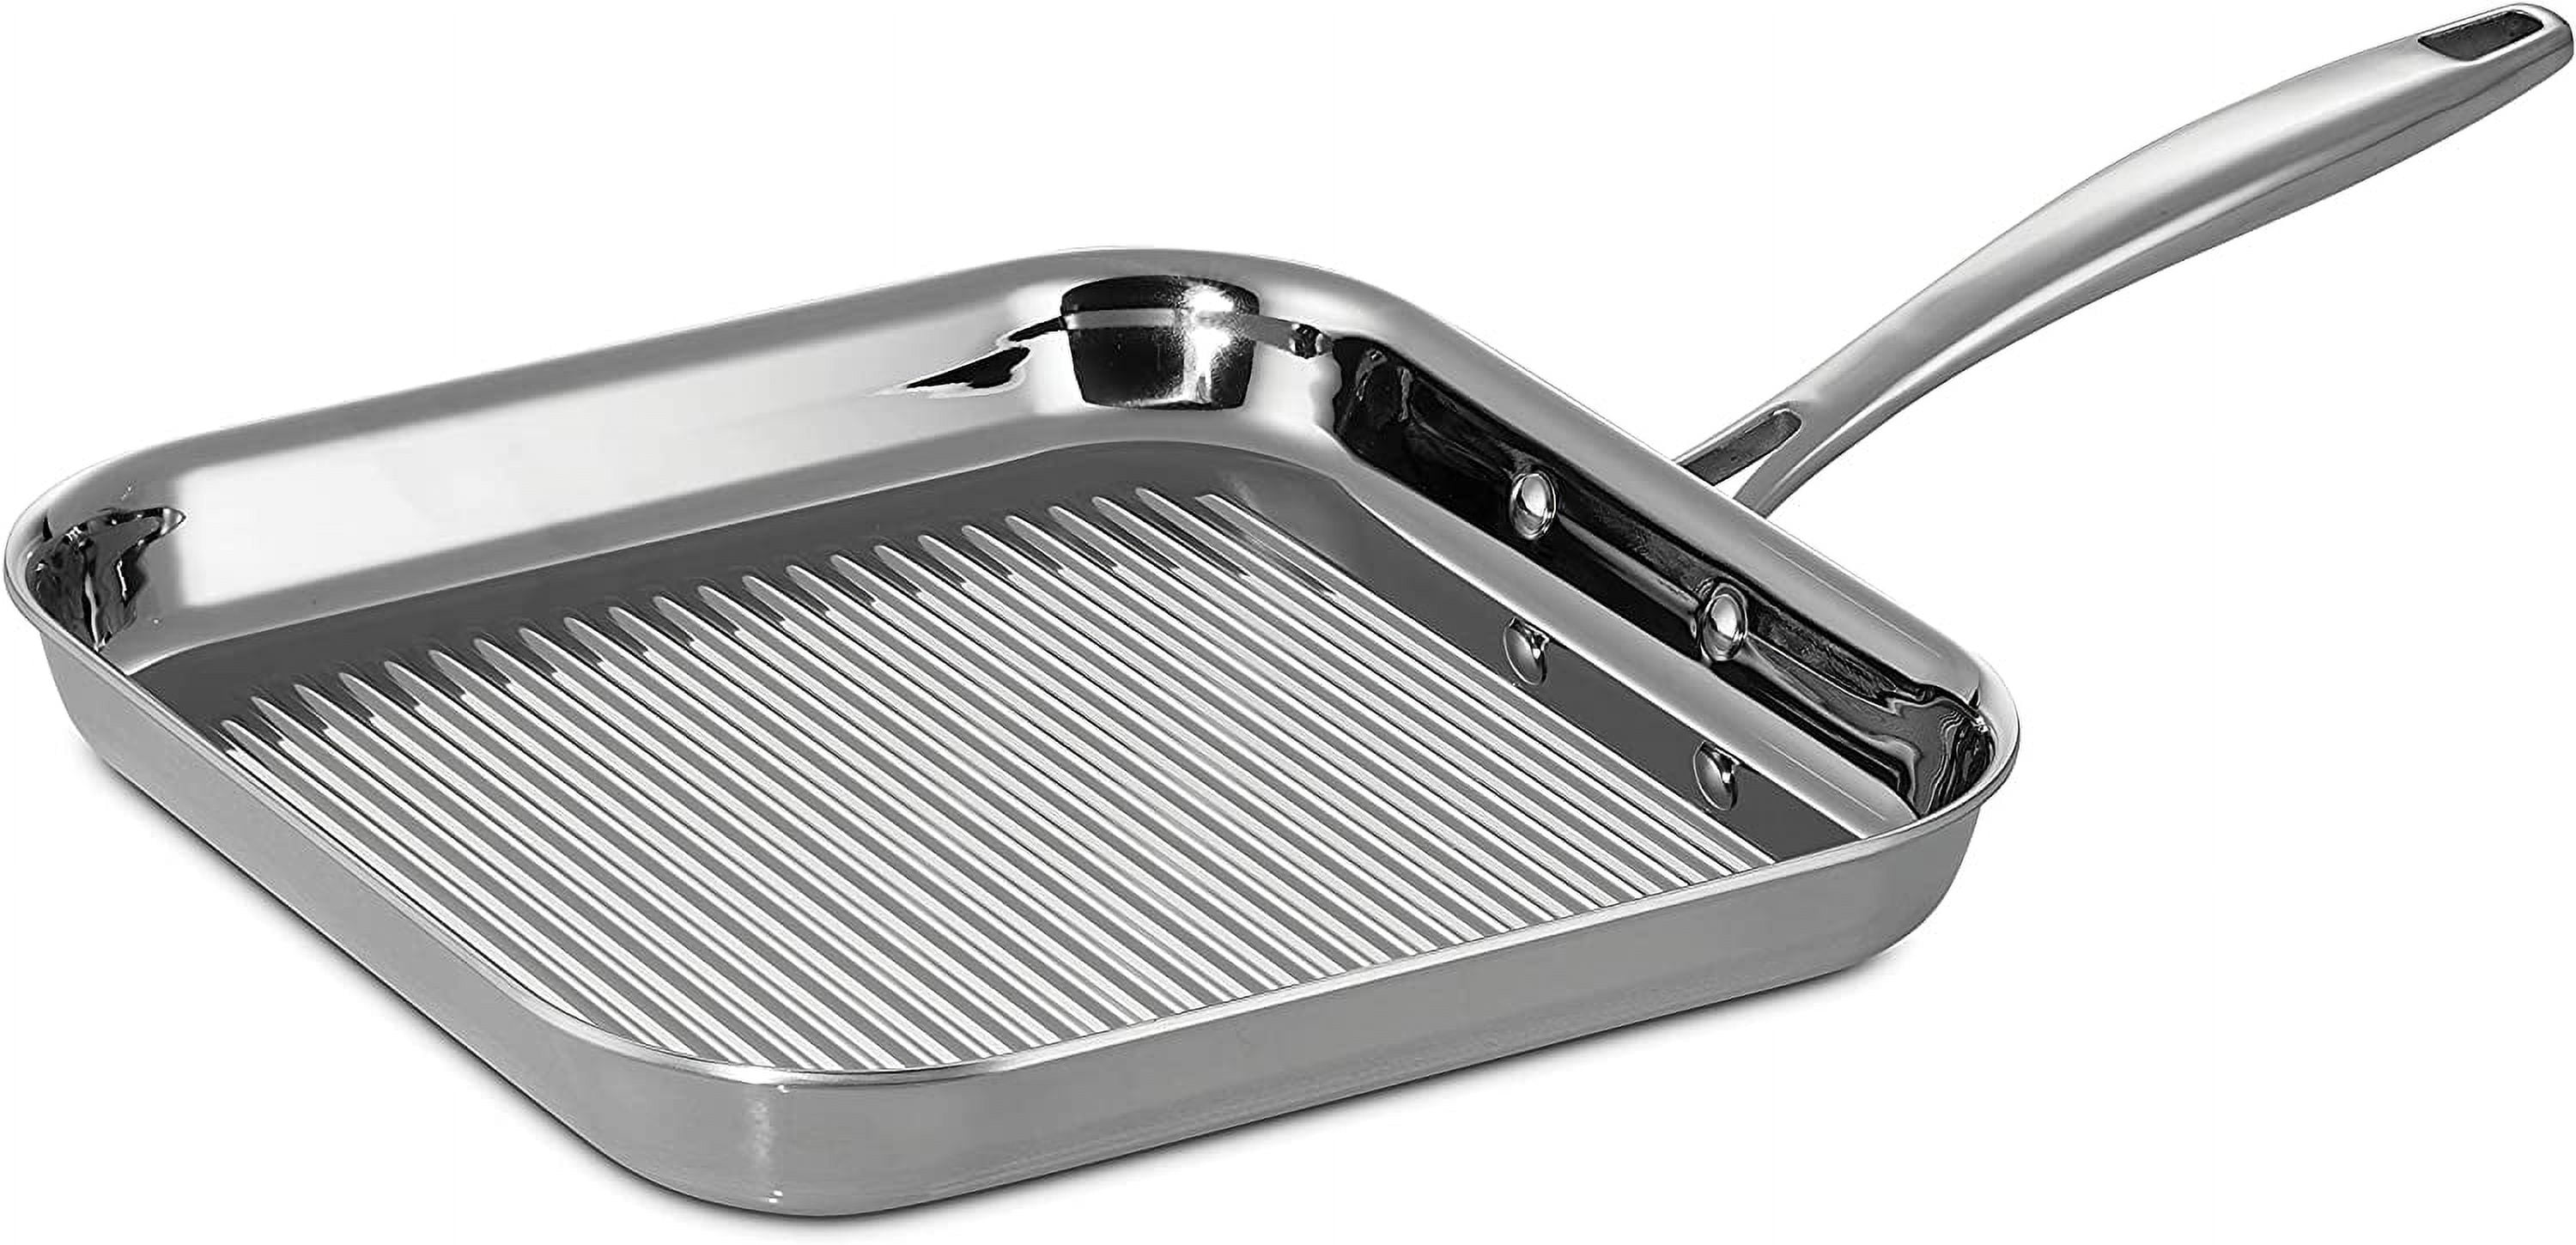 11 Stainless Steel Square Grill Pan - The Peppermill